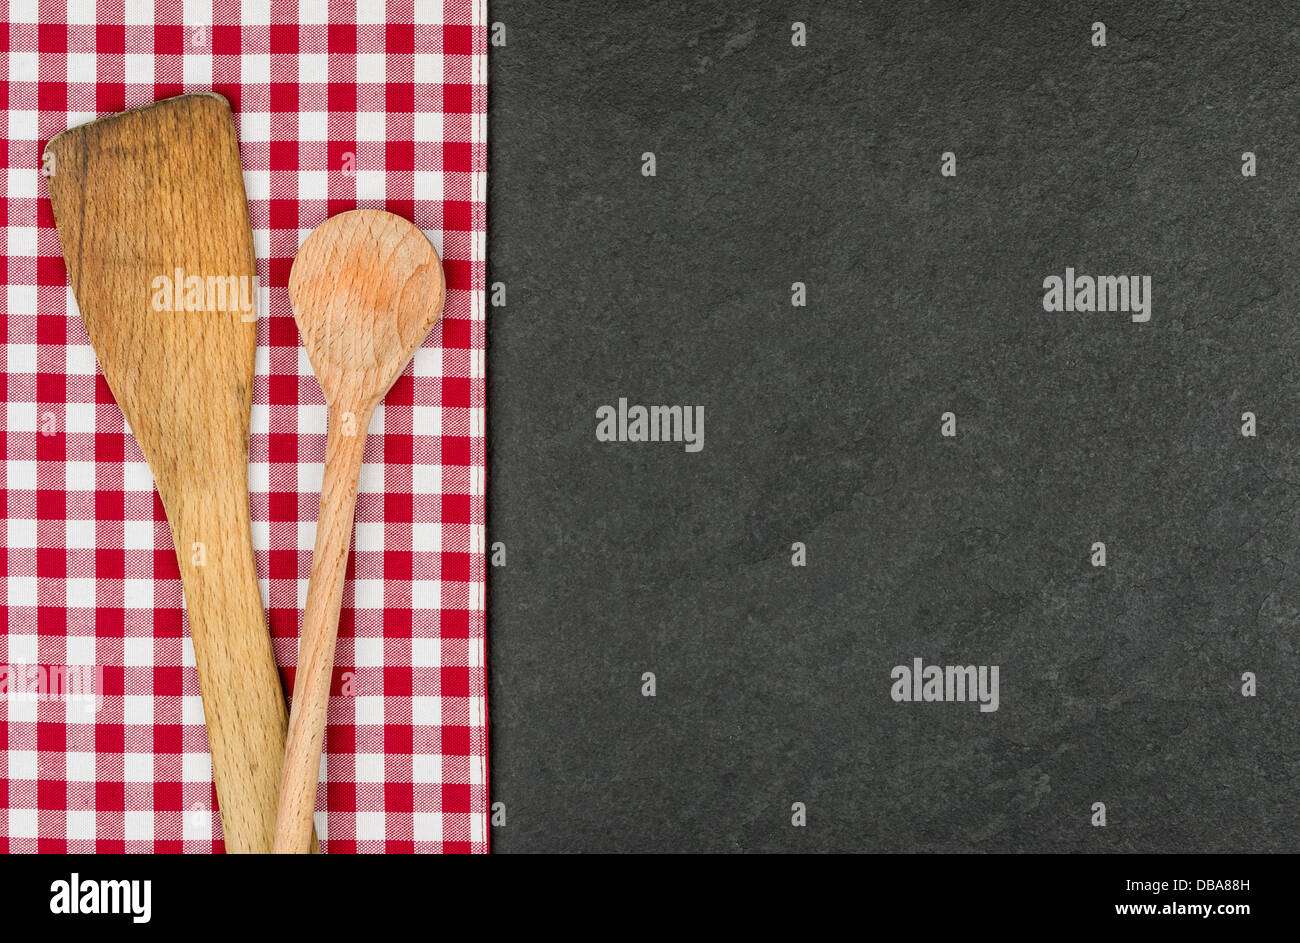 Wooden spoon on a slate plate with a red checkered tablecloth Stock Photo